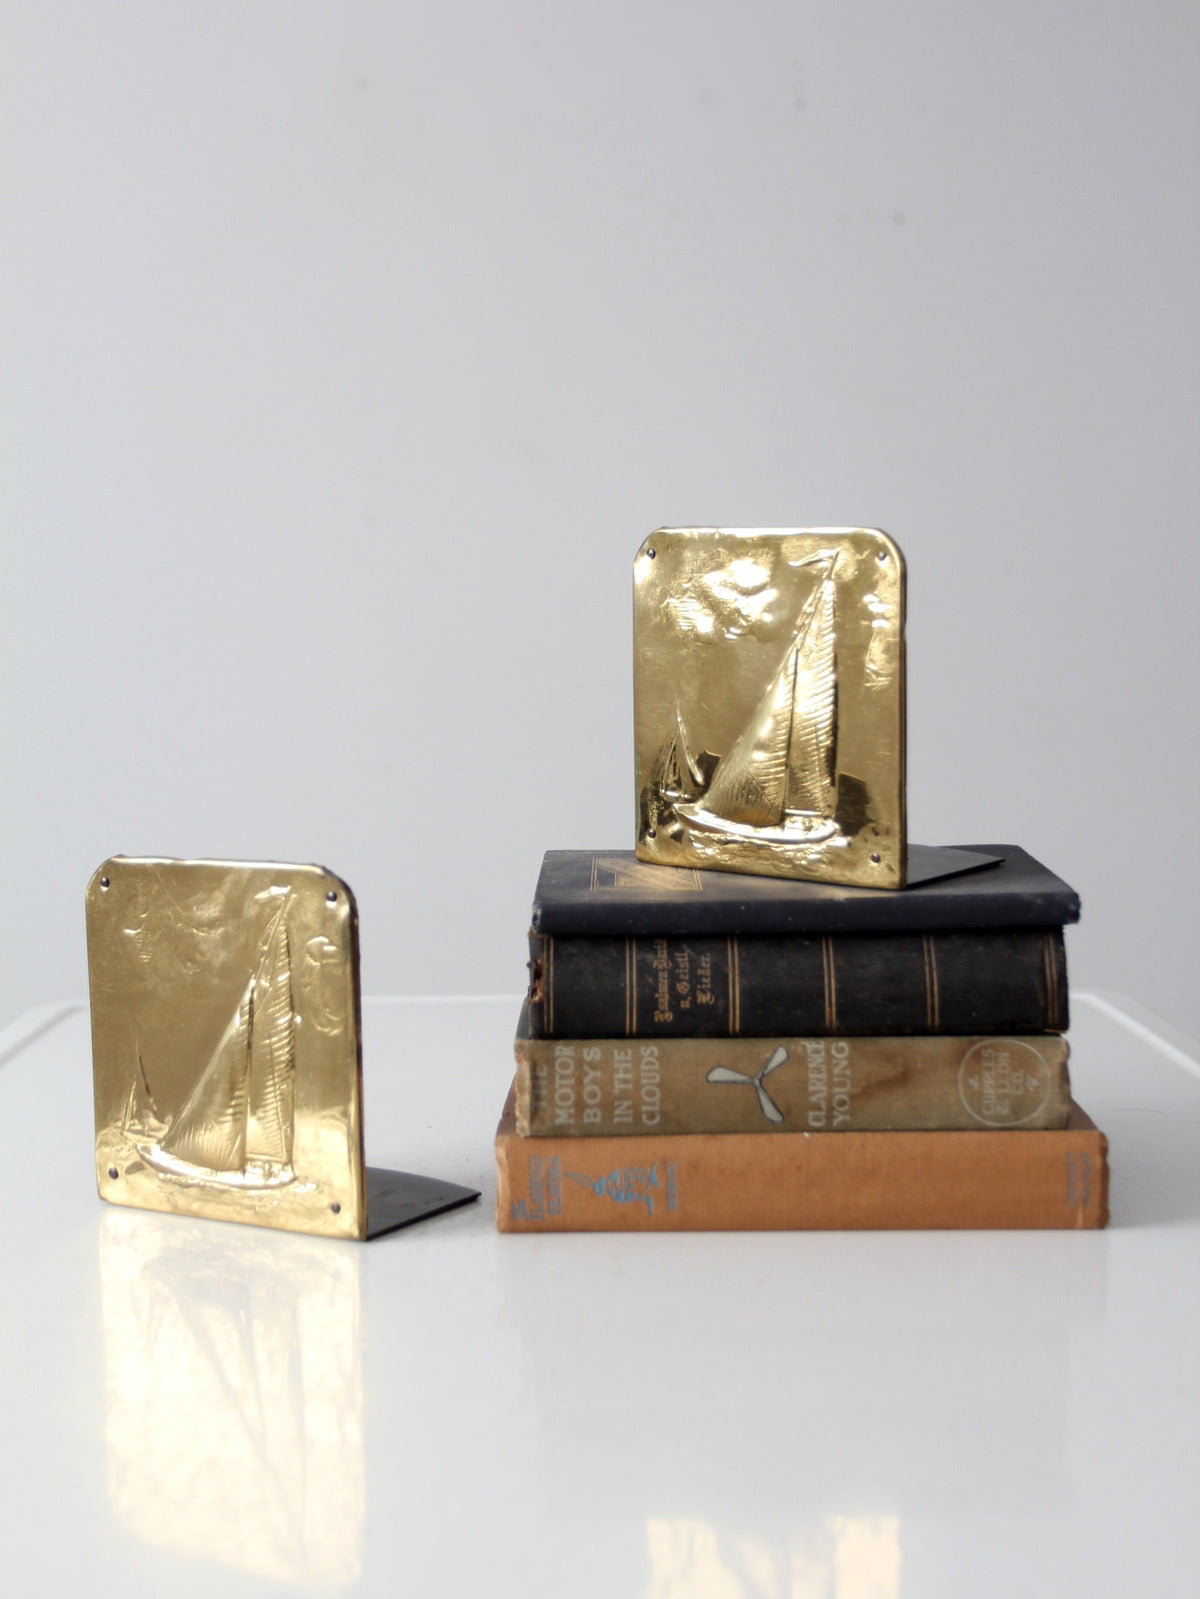 Silver Plate and Brass Seashell Bookends For Sale at 1stDibs